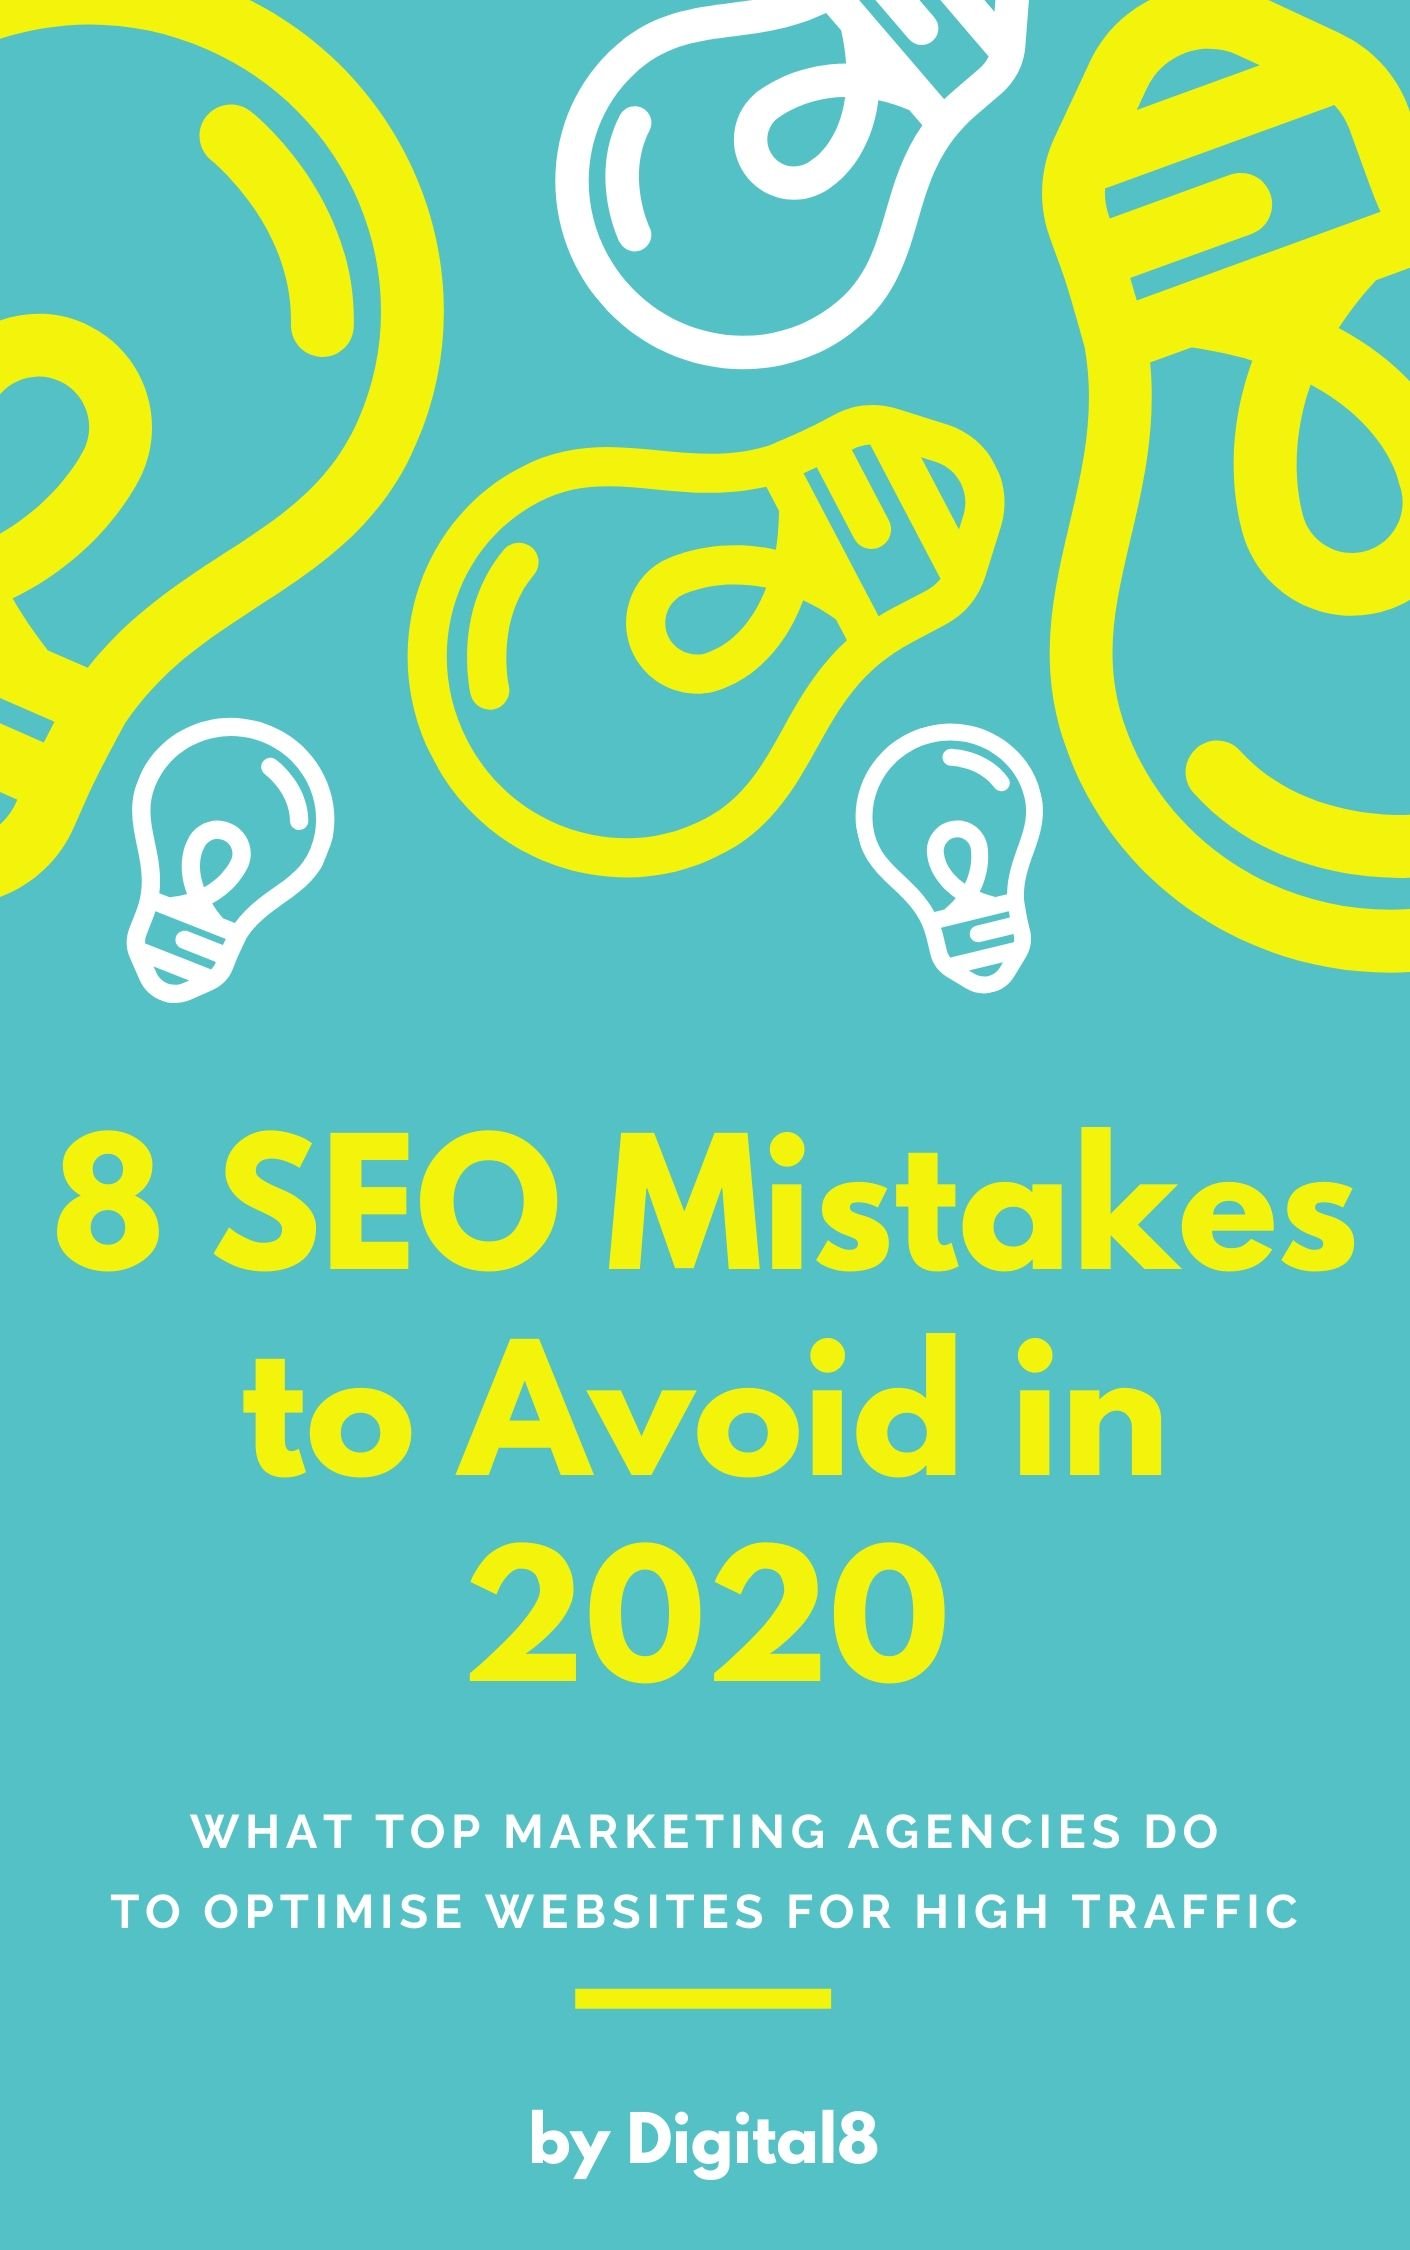 8 SEO Mistakes to Avoid in 2020